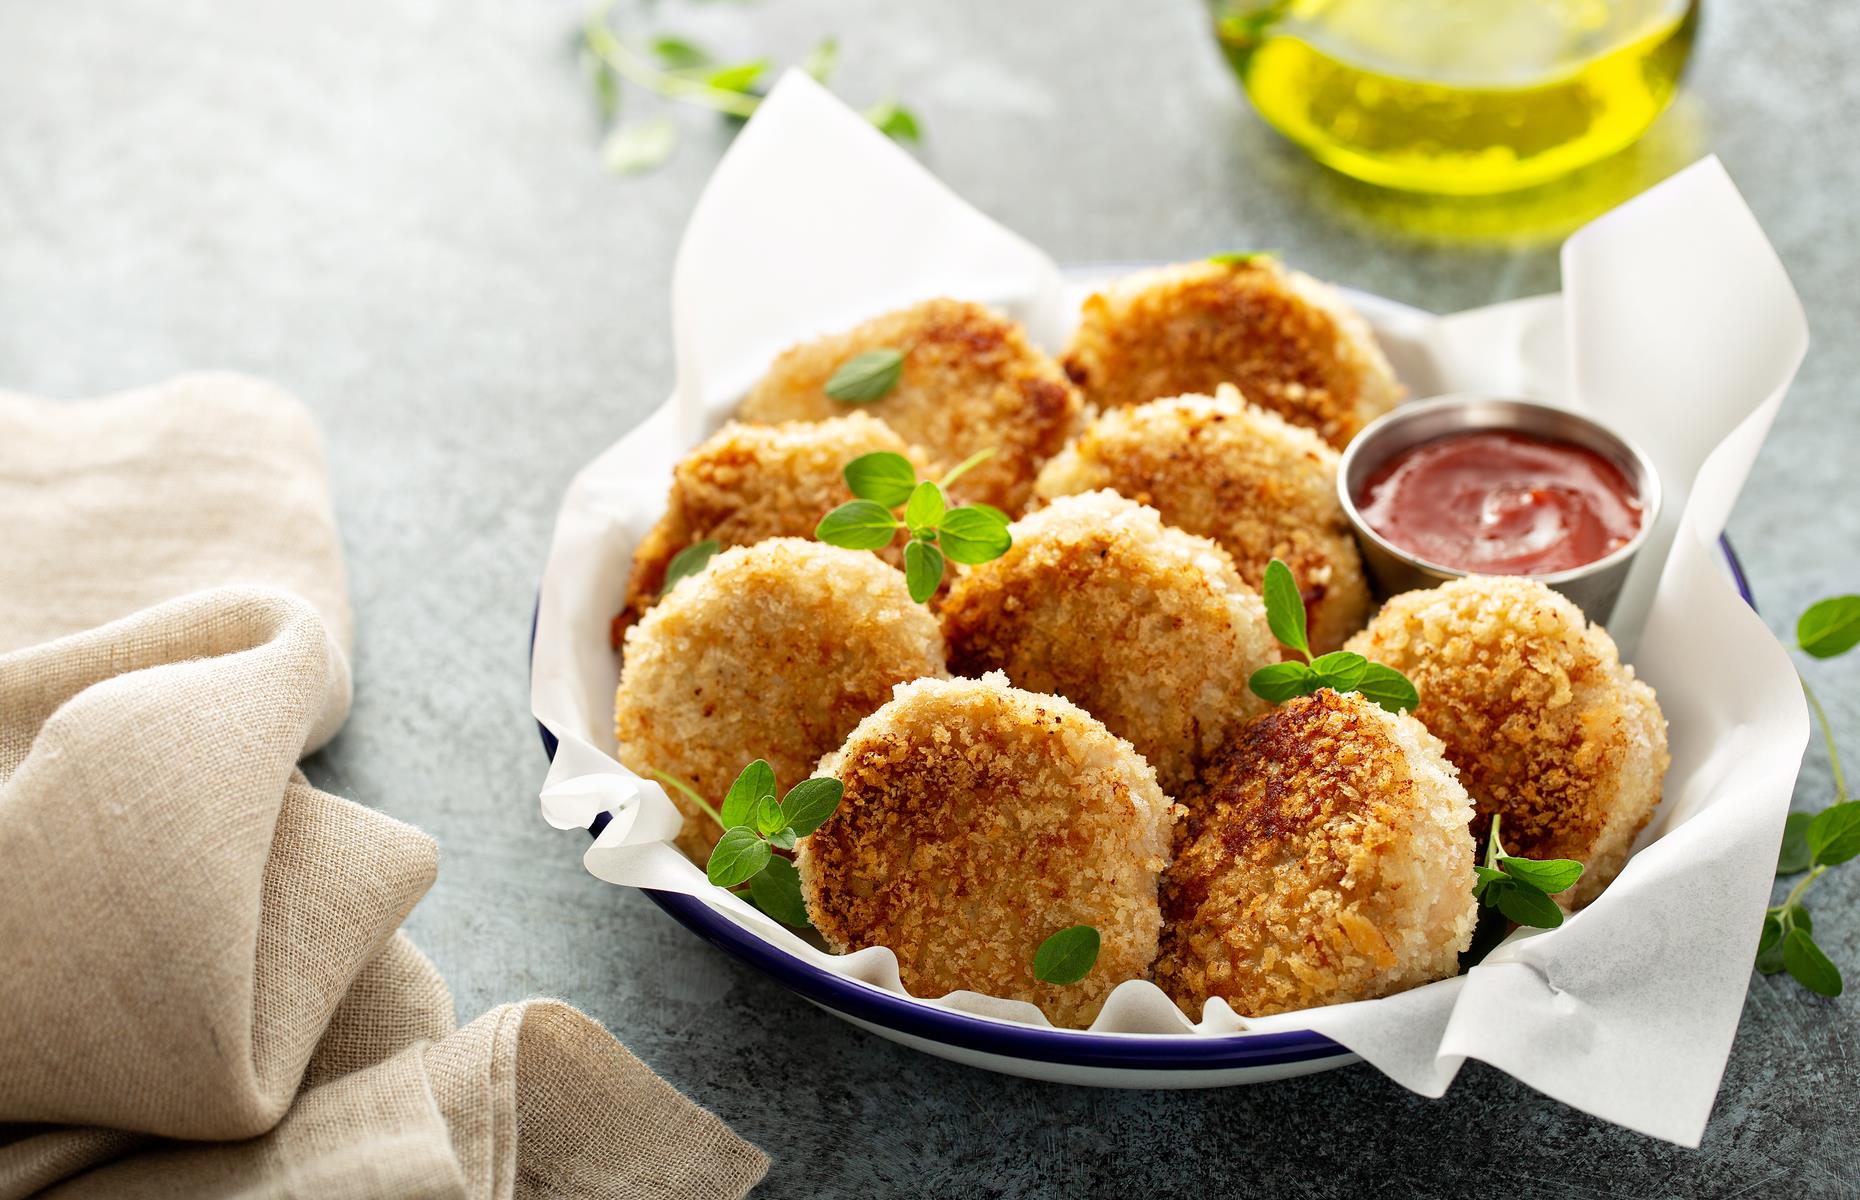 <p>Instead of coating homemade fish cakes in breadcrumbs, for a properly crispy, crunchy outer layer, Nigella recommends covering the raw patties with crushed Ritz Crackers or matzo meal. She also steers clear of frying her fishcakes, particularly when cooking for a crowd, and instead recommends baking them in the oven.</p>